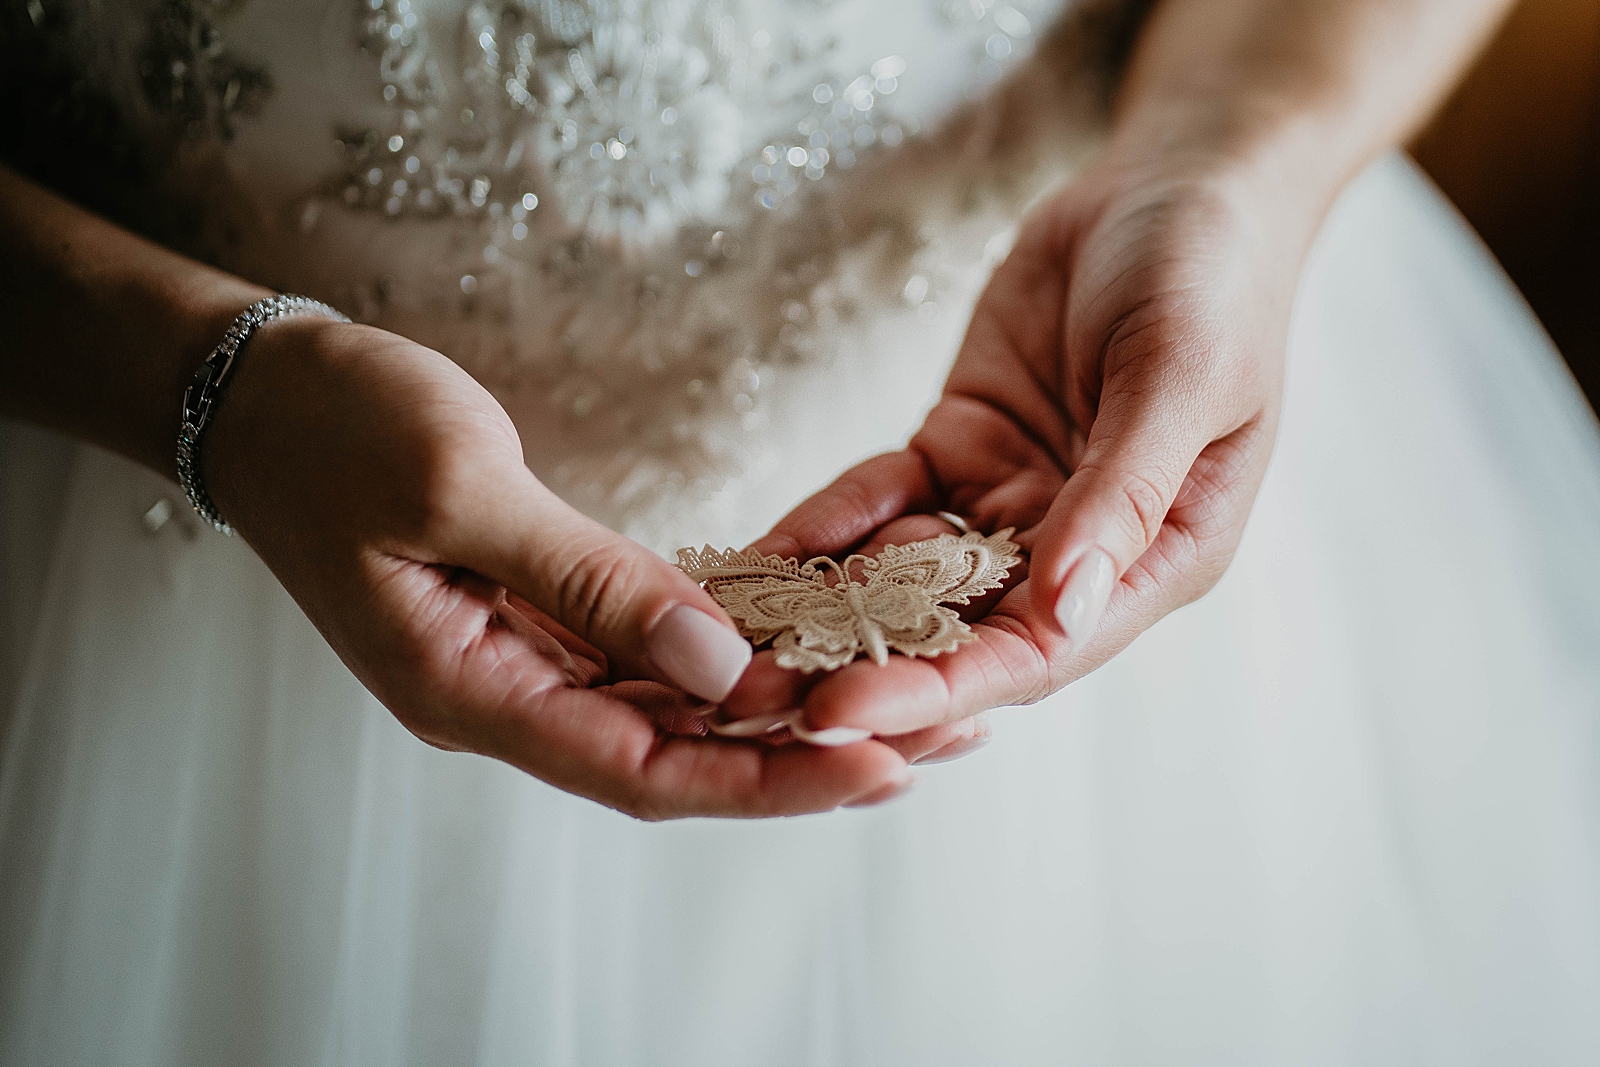 Bride holding lace butterfly in hands getting ready